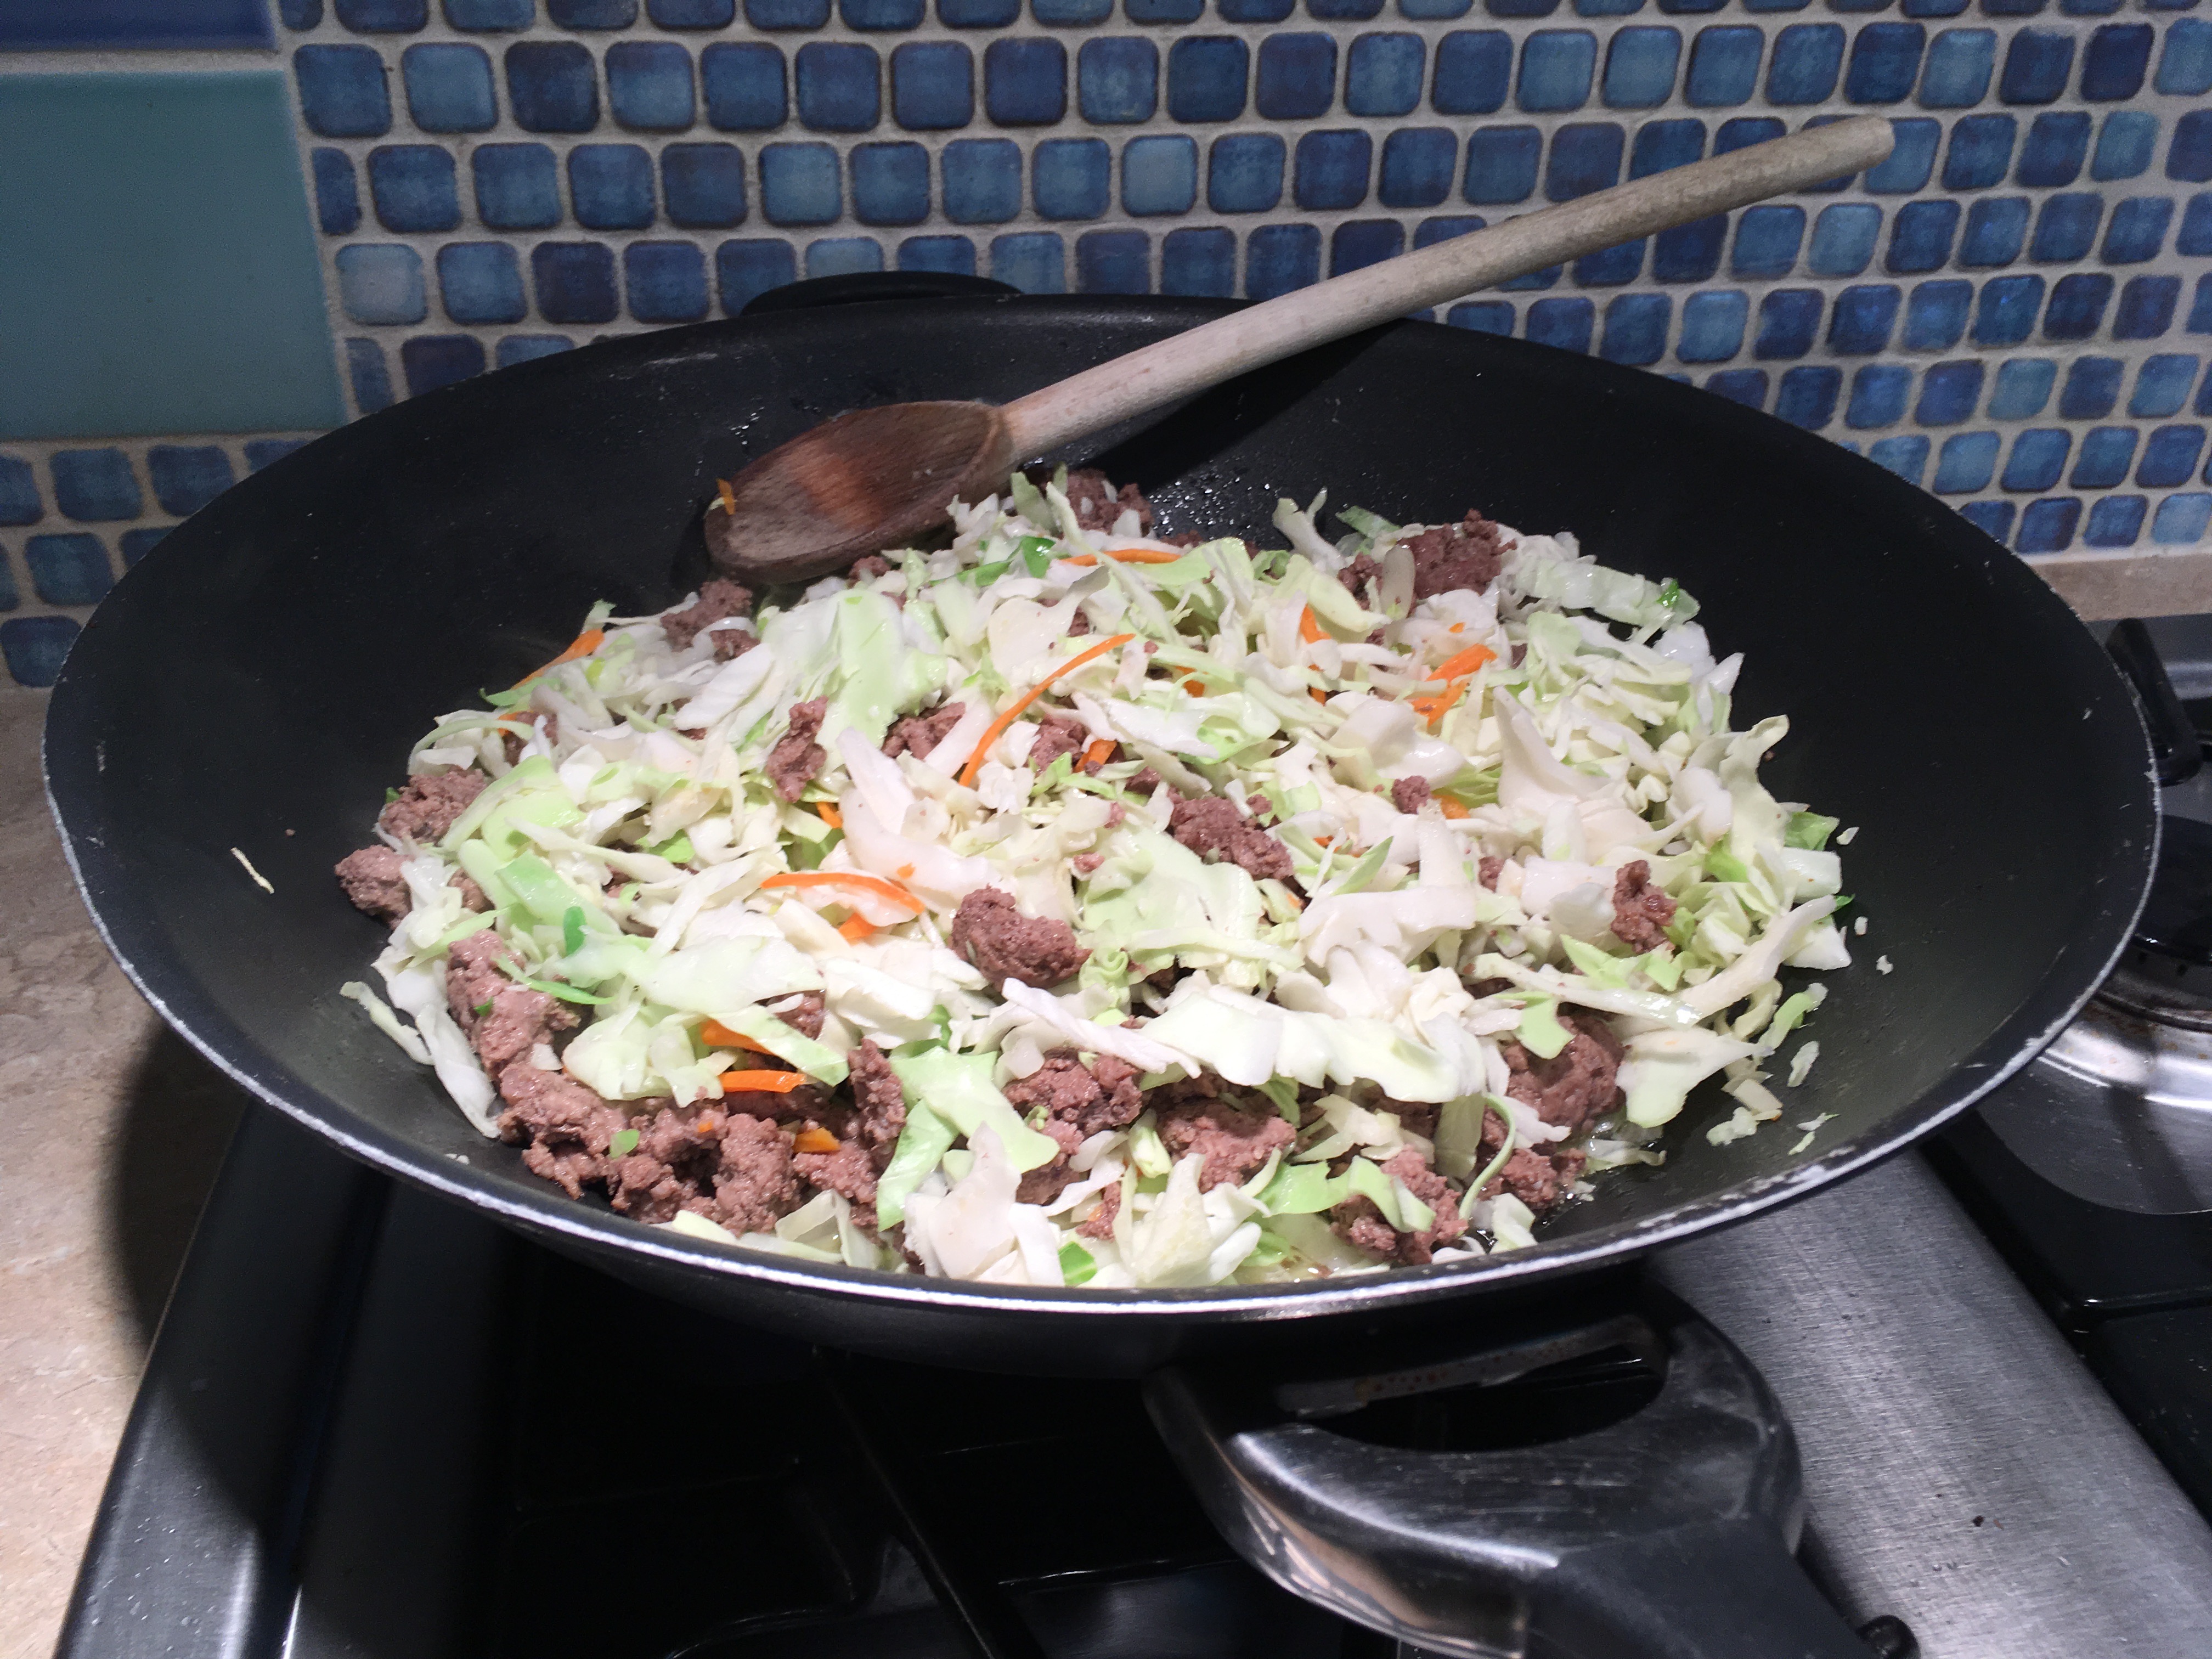 Beef and Cabbage Stir Fry in the Wok.